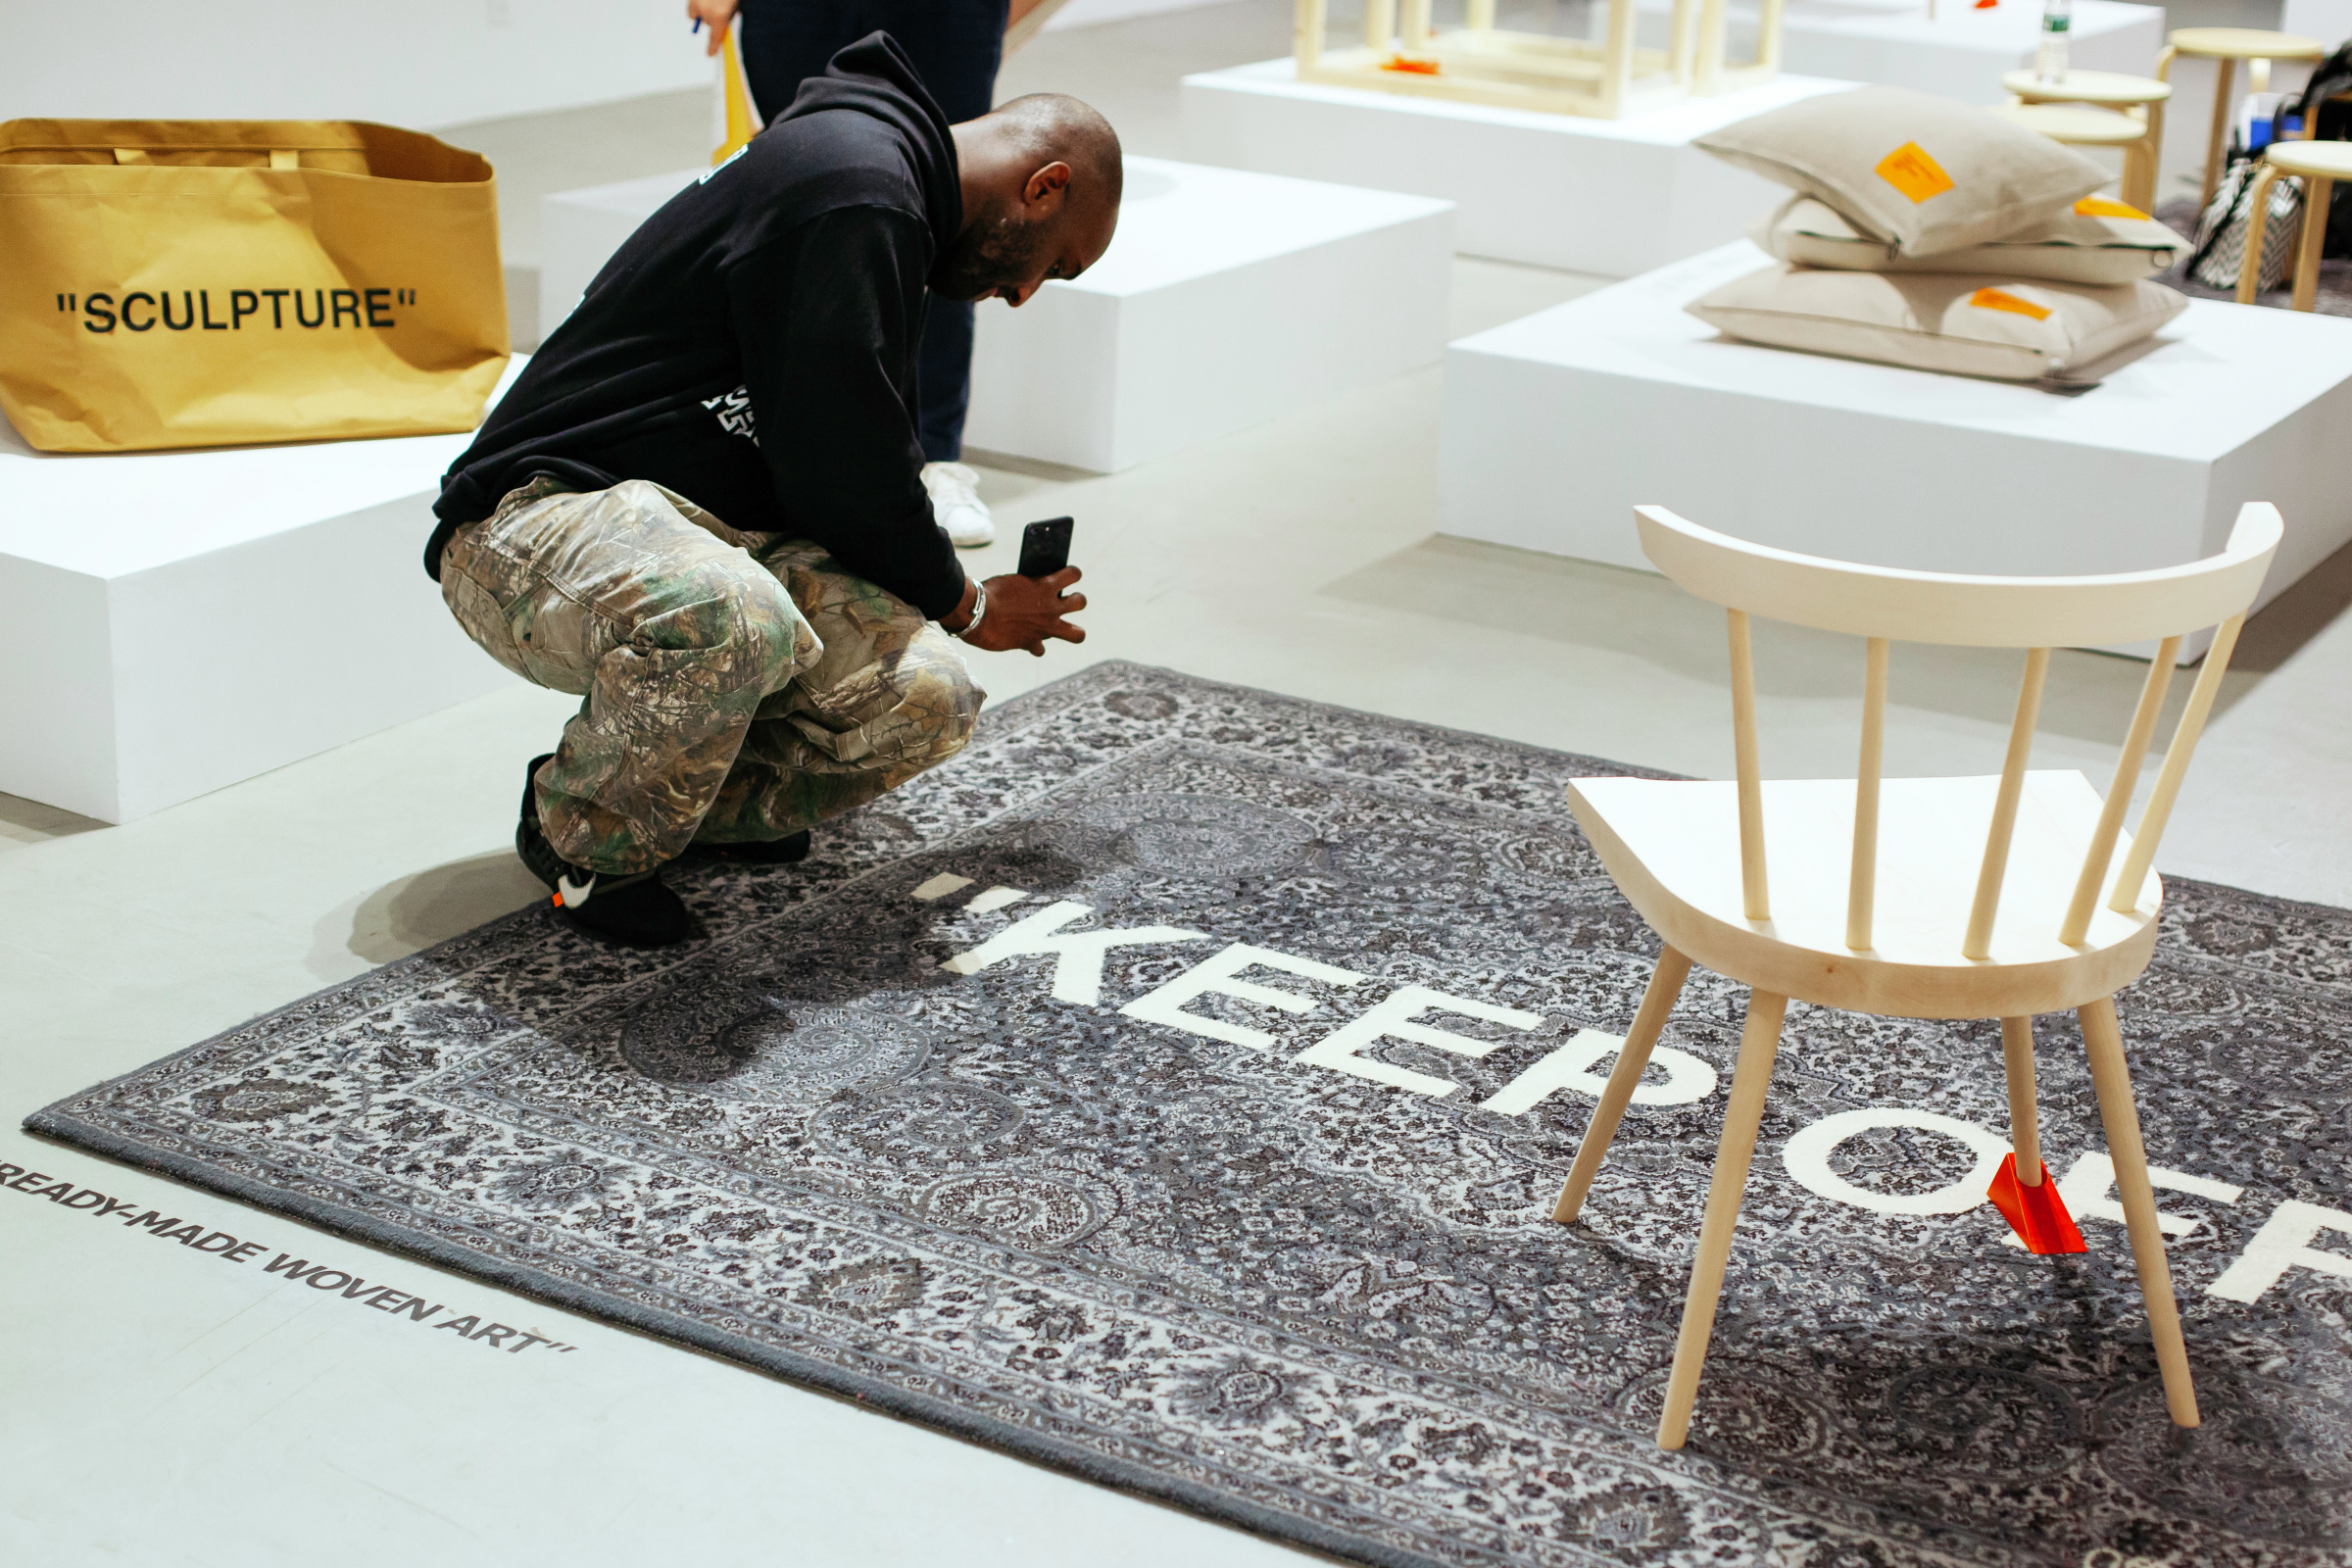 “Art” with a Price Tag: Virgil Abloh’s Exhibit at the High Museum